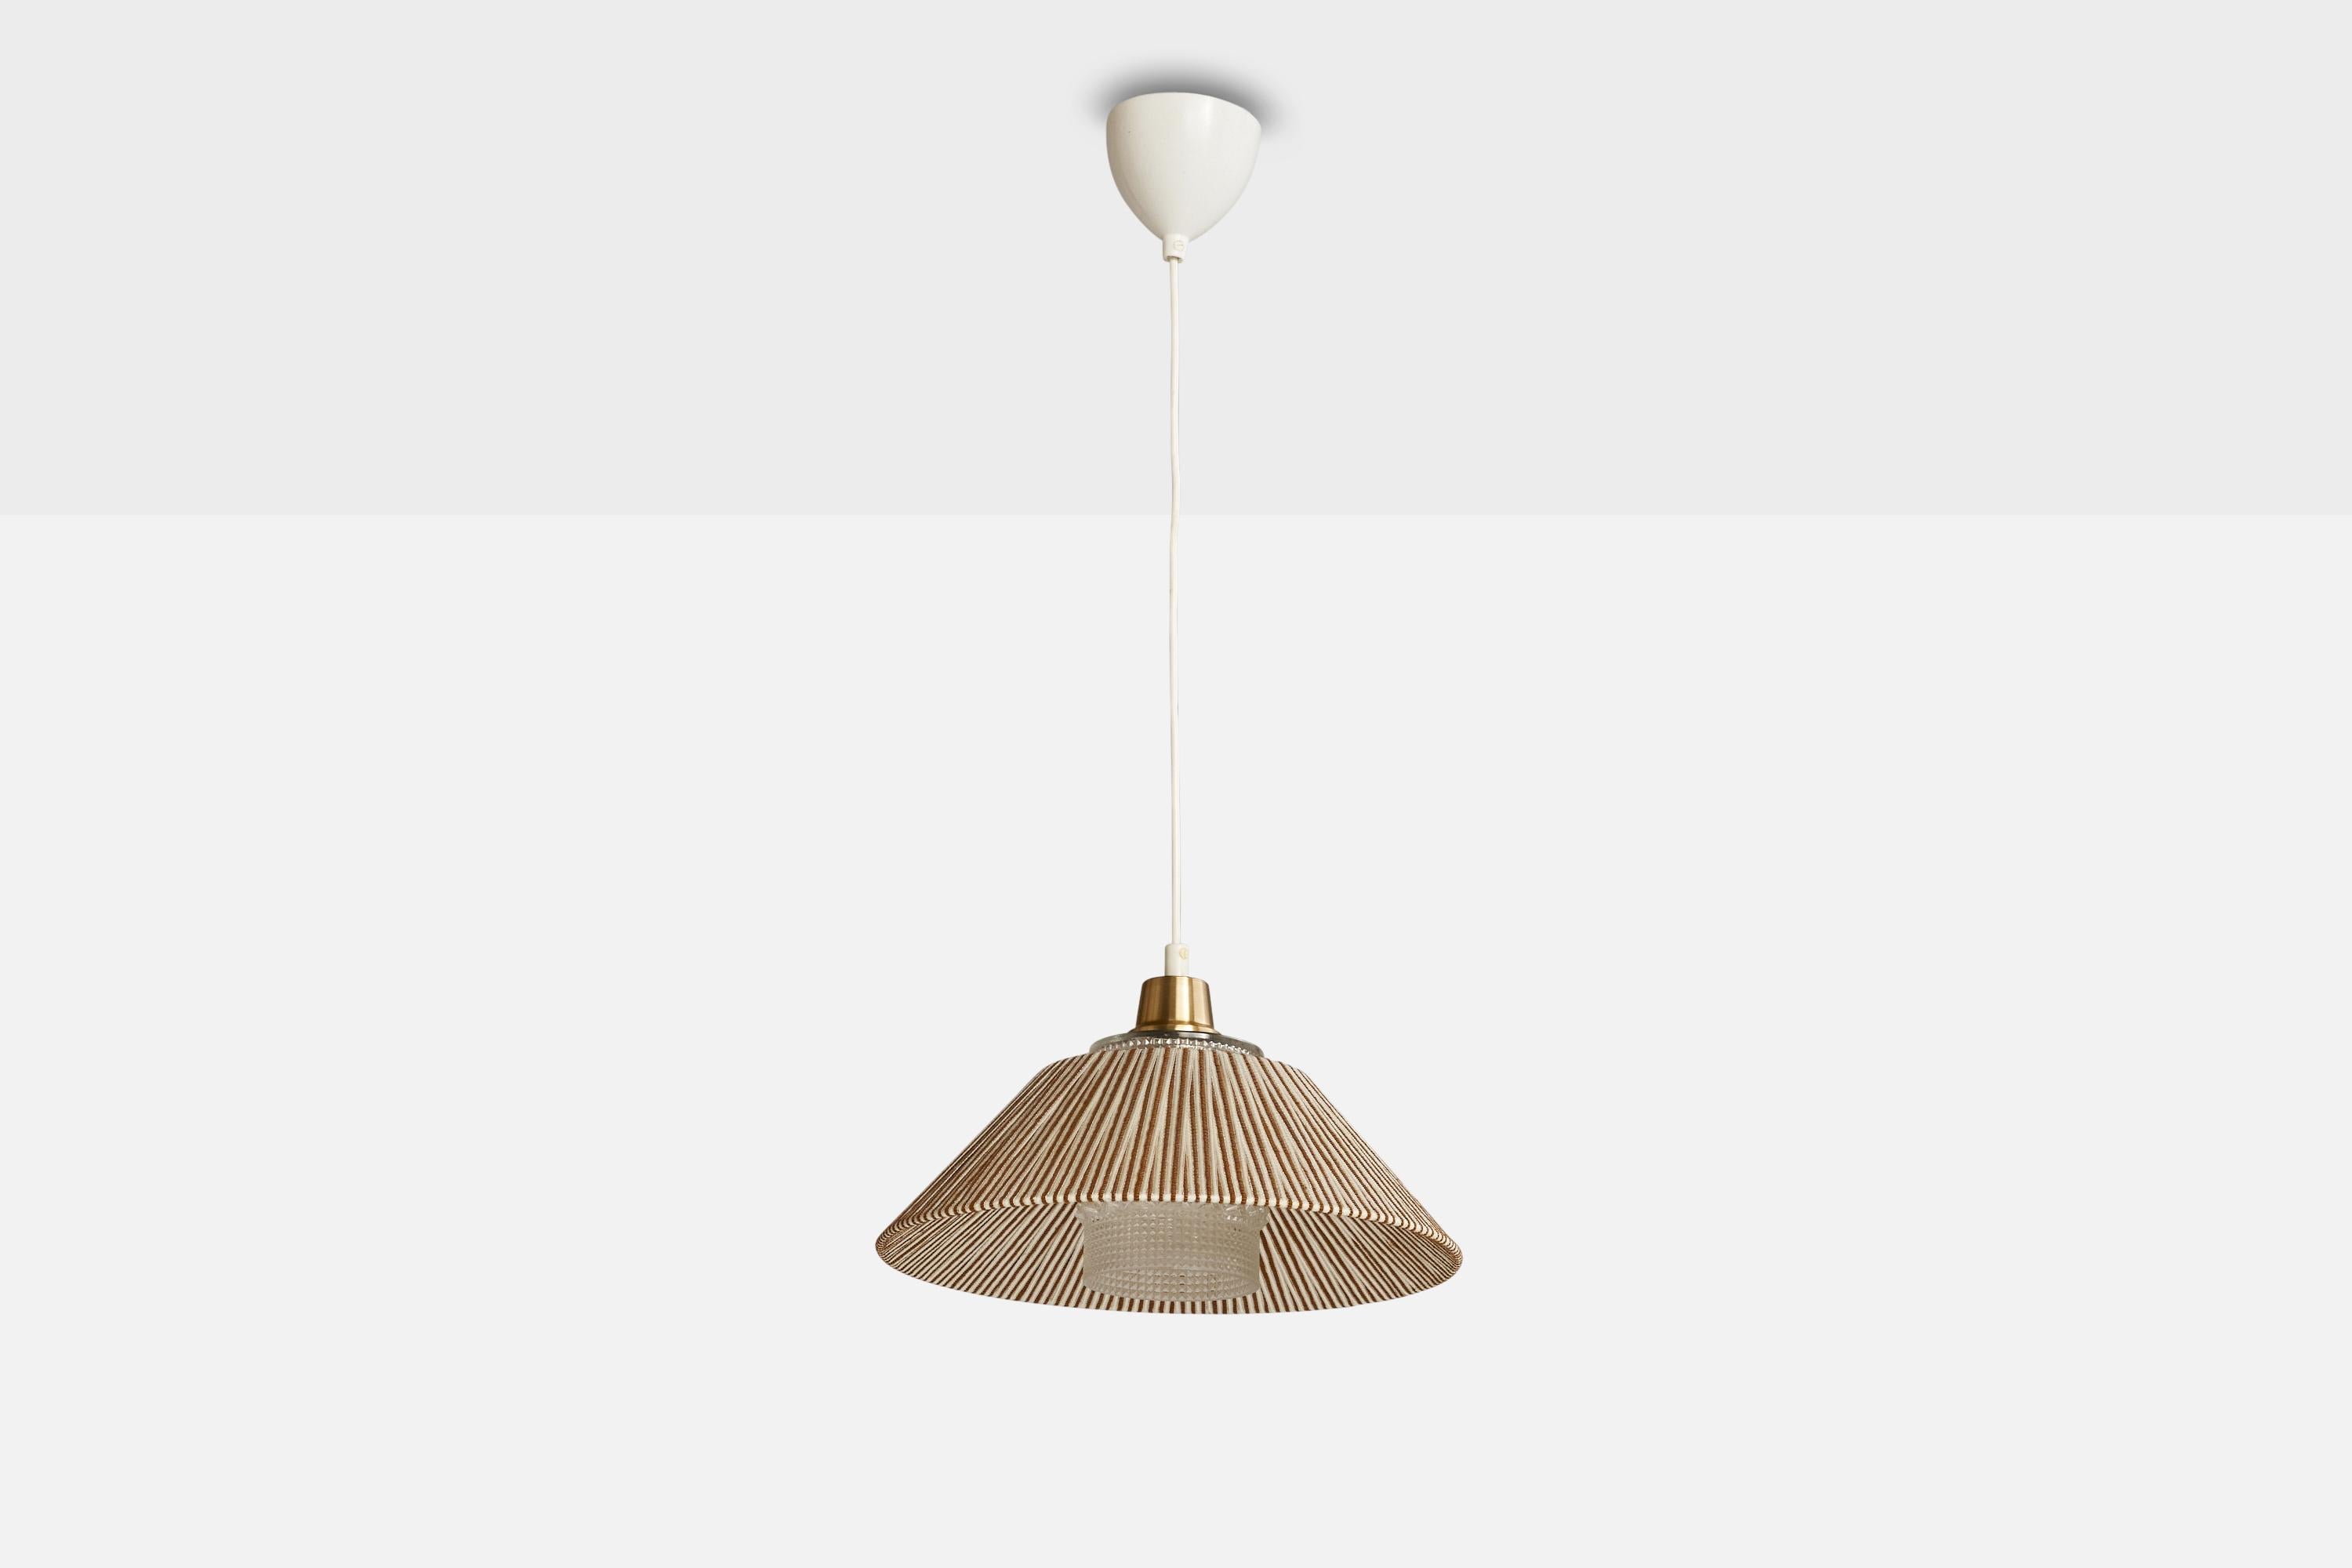 A brass, faceted glass and beige brown fabric pendant light designed and produced in Sweden, c. 1950s.

Dimensions of canopy (inches): 3.5” H x 3.75” Diameter
Socket takes standard E-26 bulbs. 1 socket.There is no maximum wattage stated on the